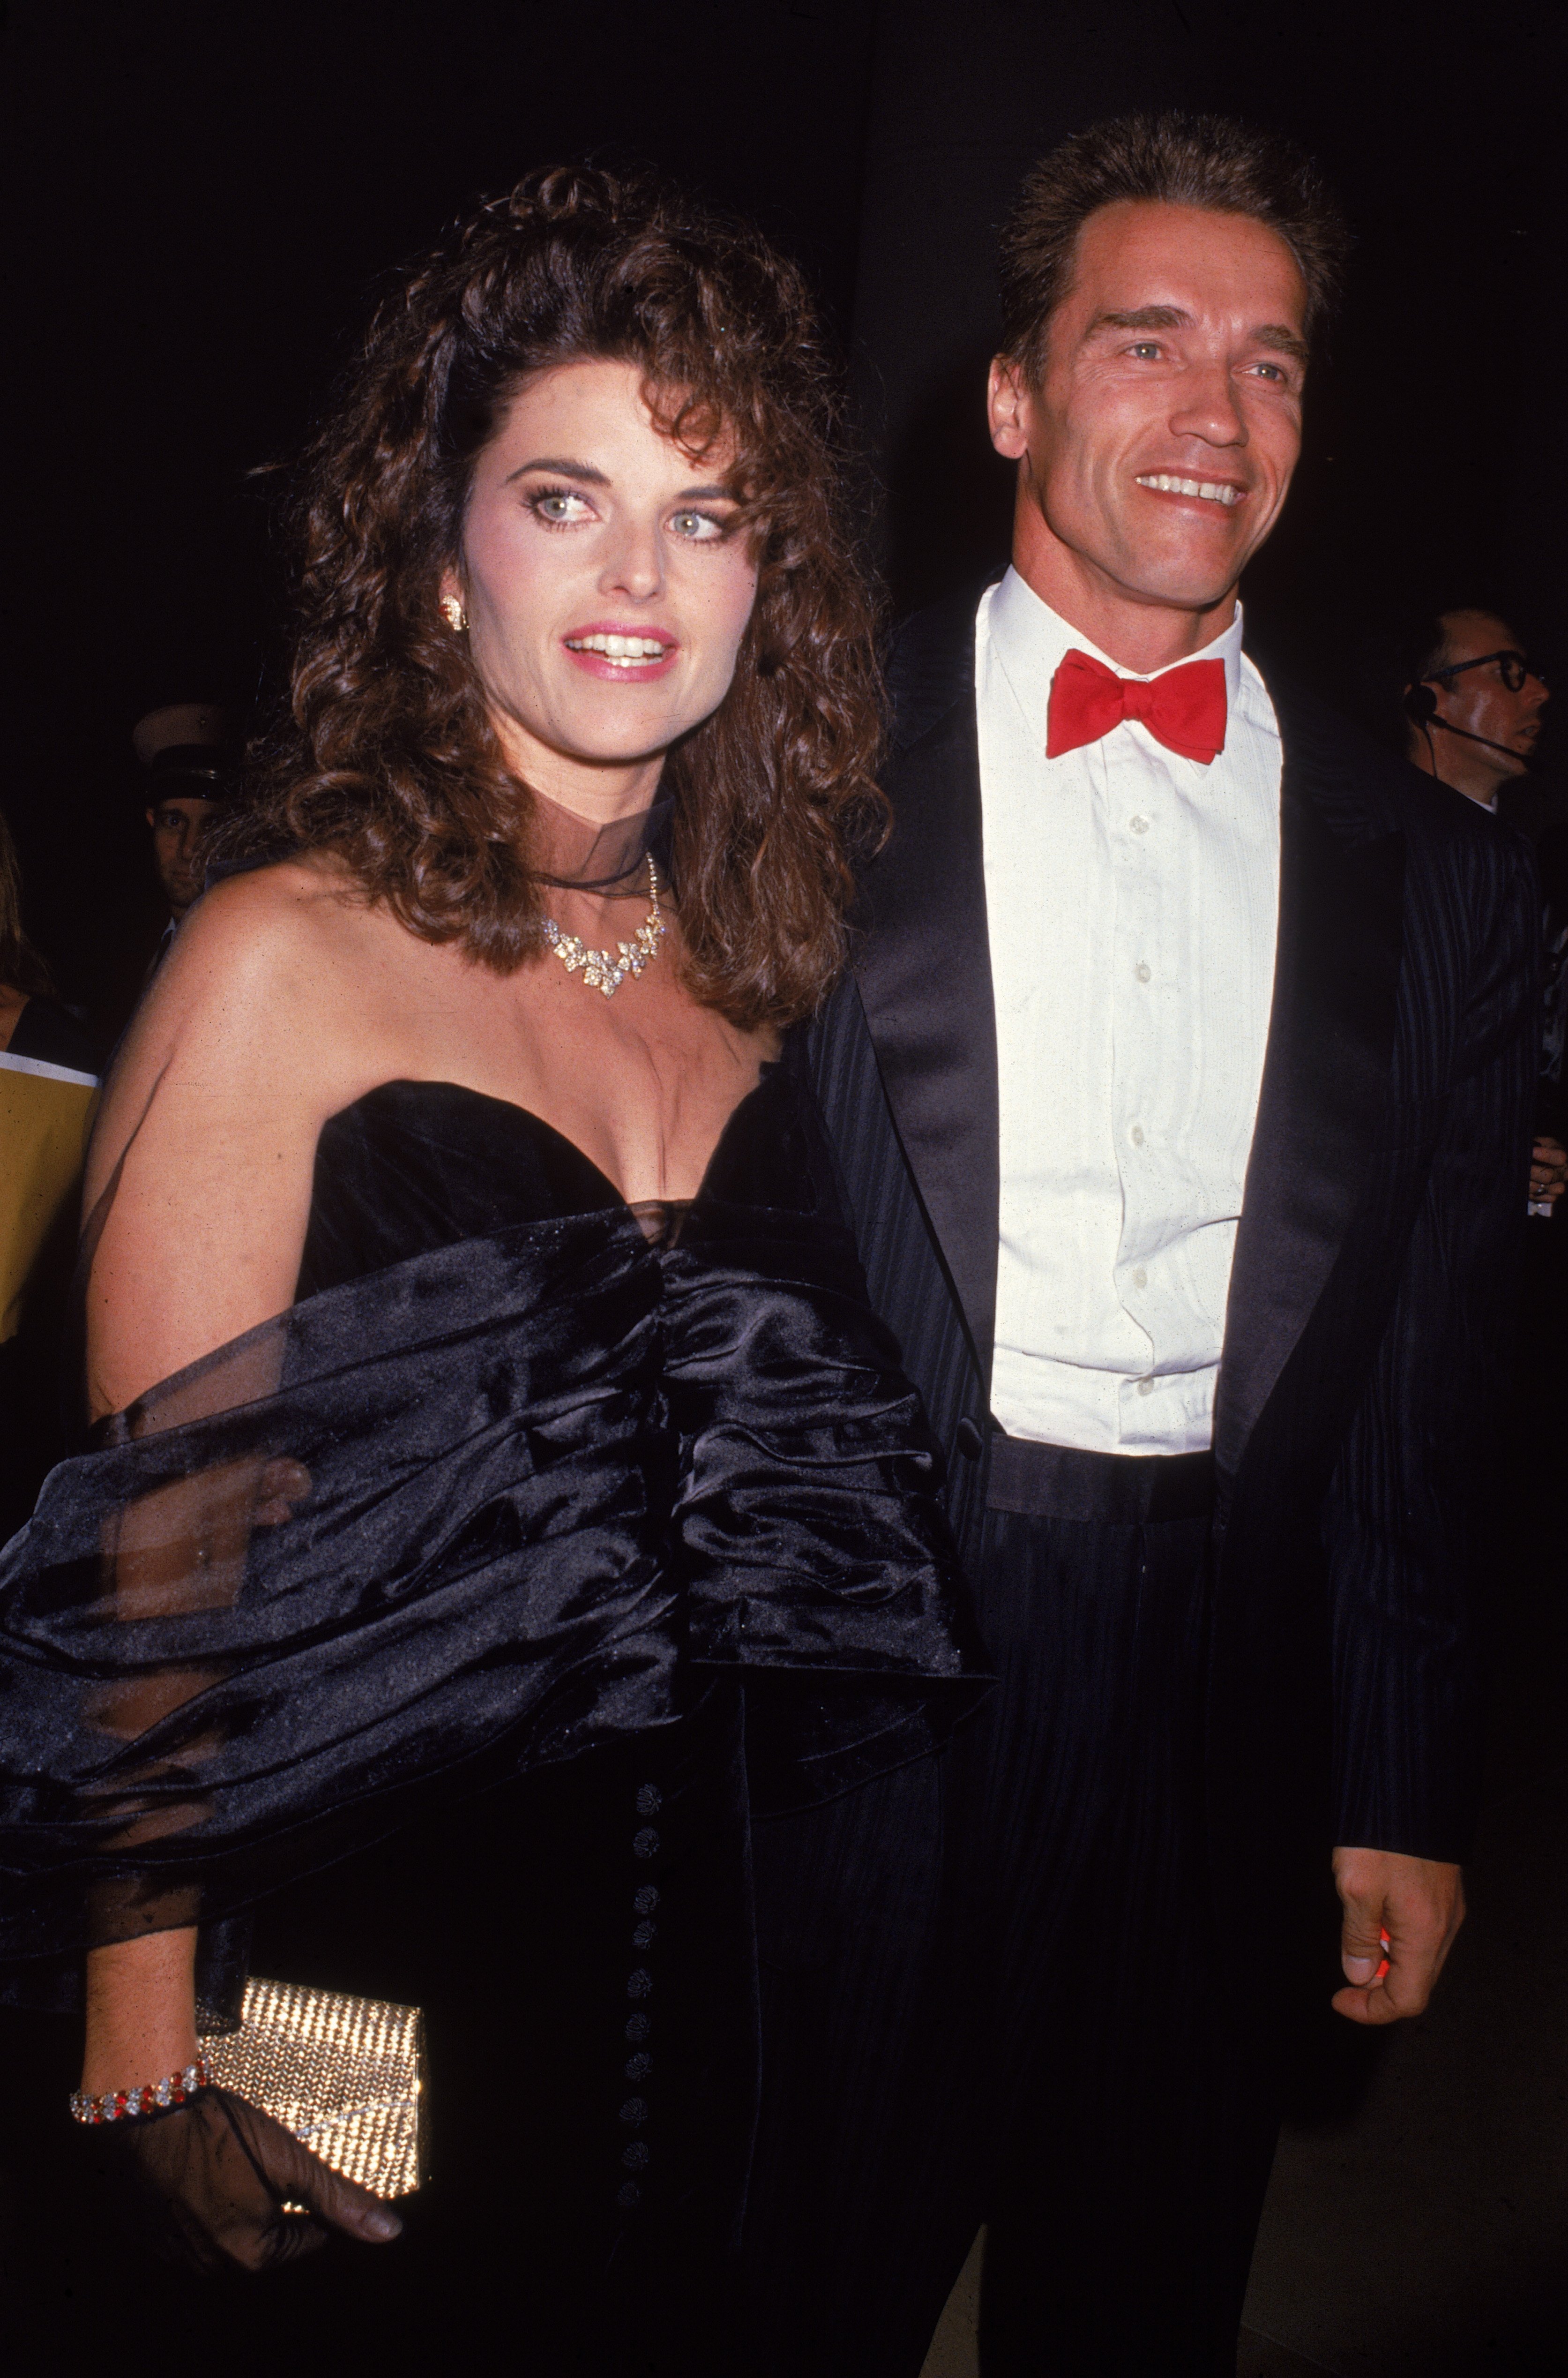 Austrian born actor Arnold Schwarzenegger and wife Maria Shriver stand dressed in formal wear at an event, circa 1986. | Source: Getty Images